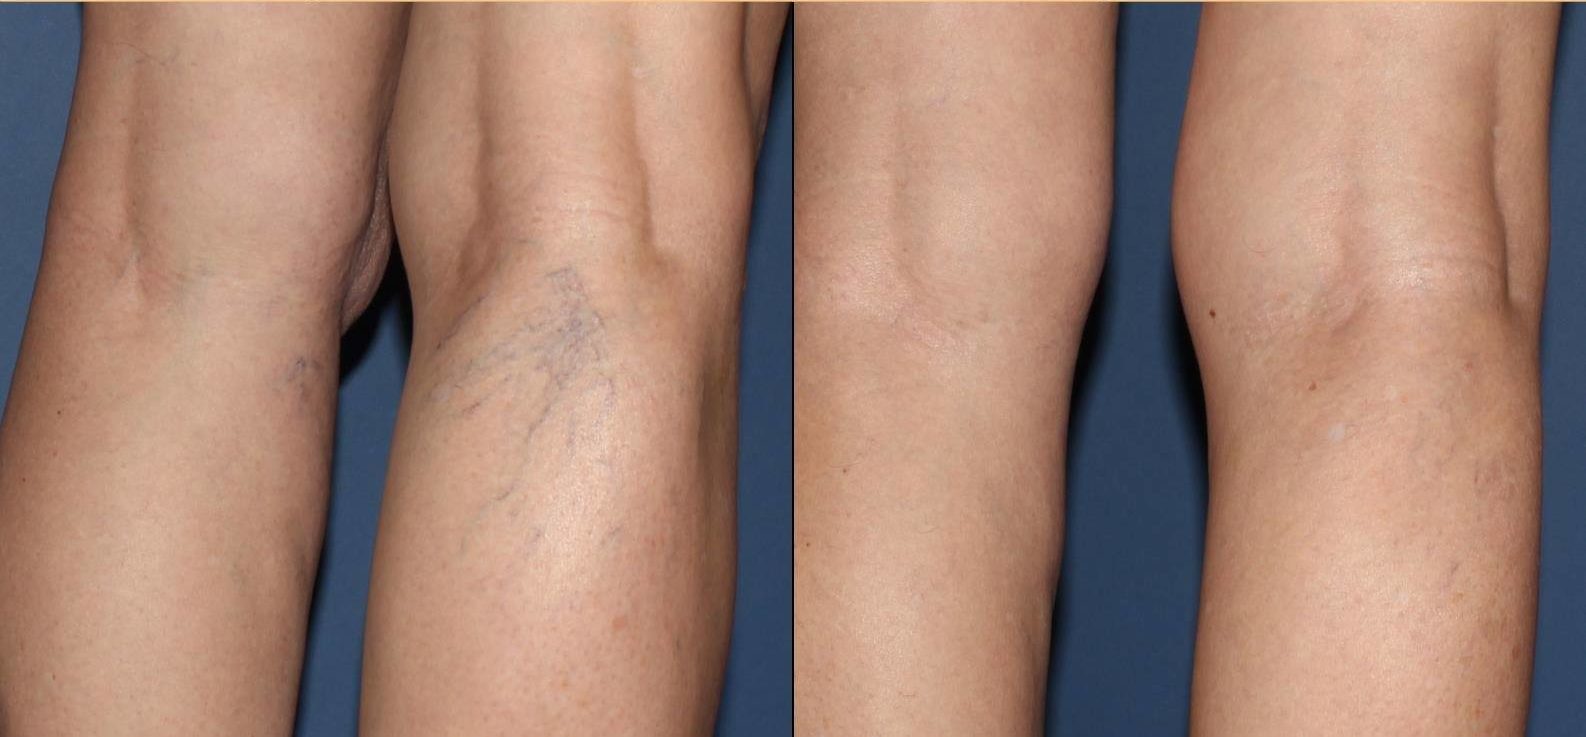 , Sclerotherapy